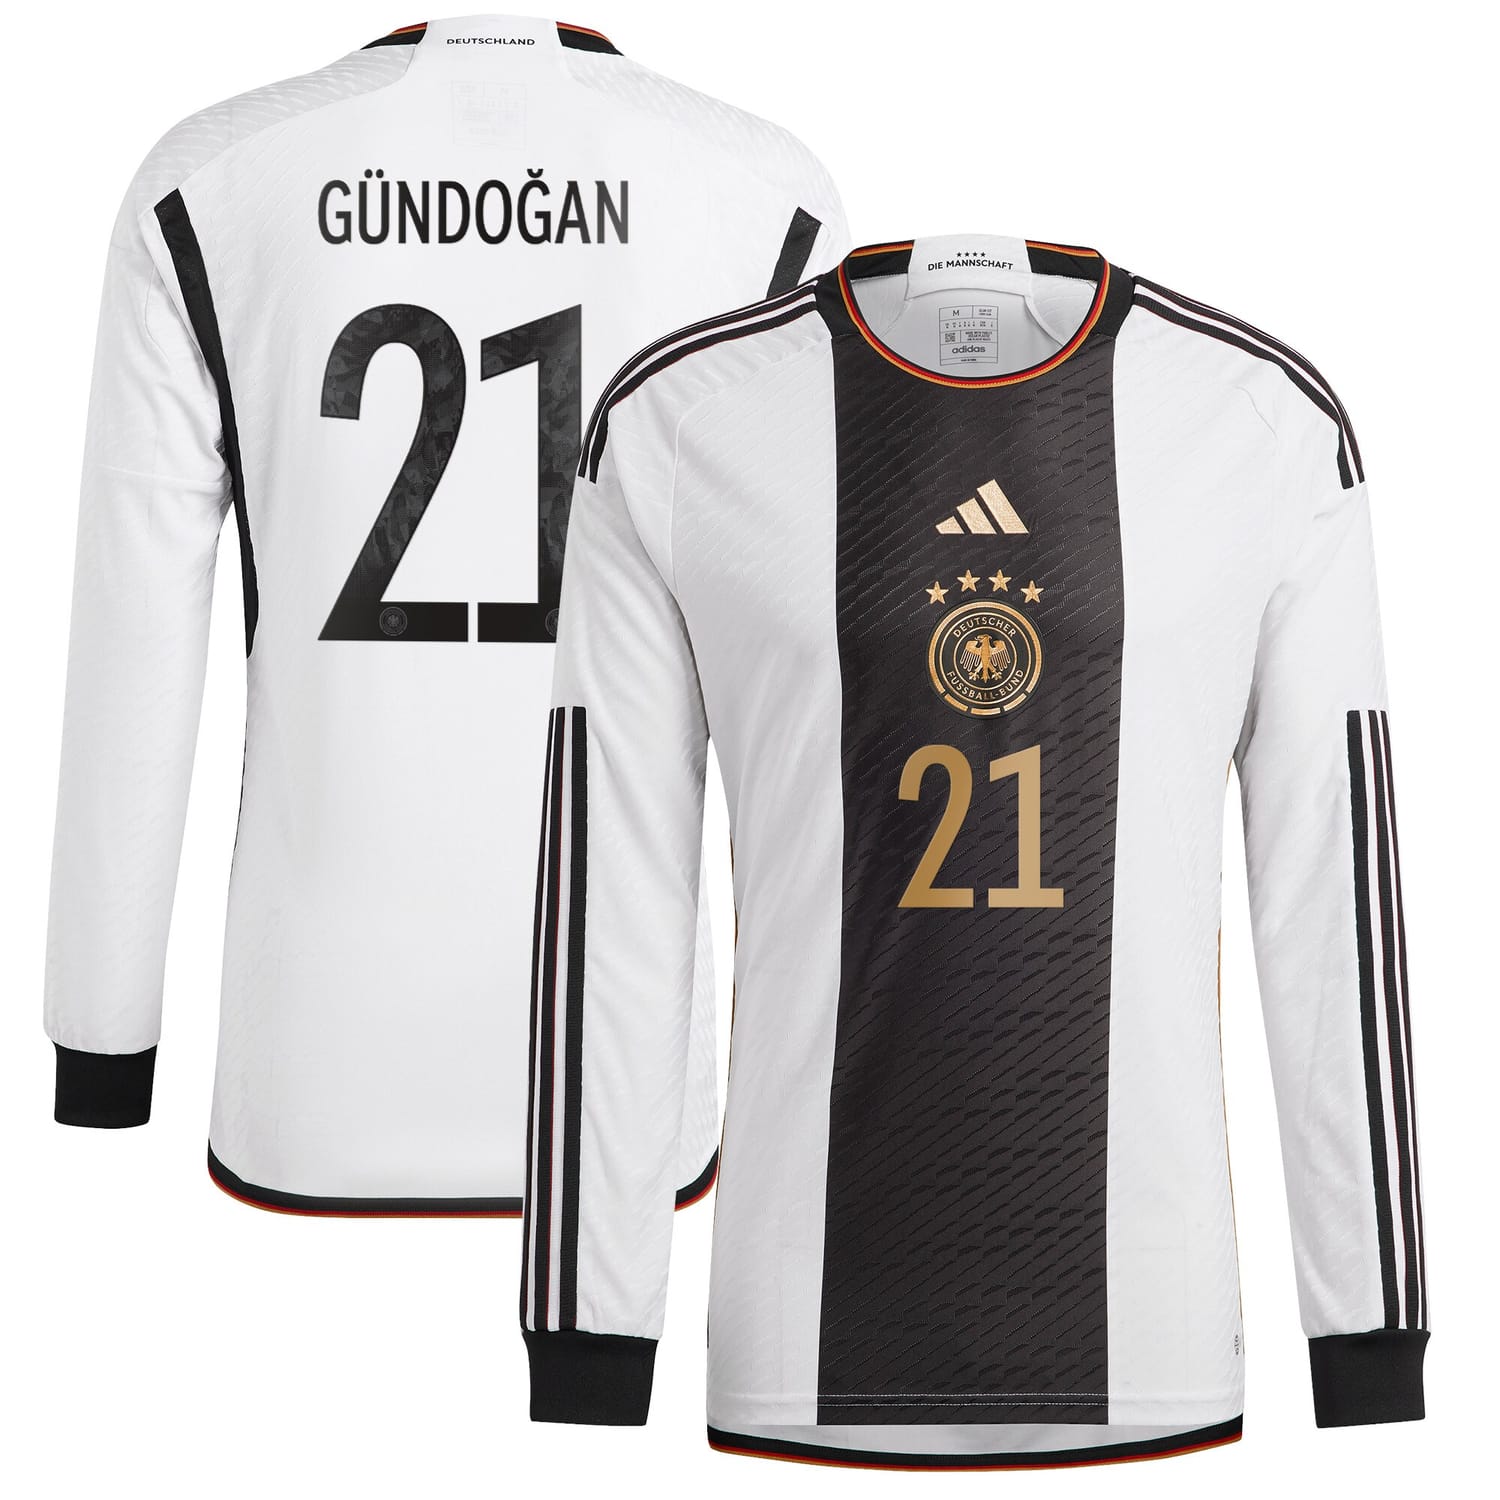 Germany National Team Home Authentic Jersey Shirt Long Sleeve player Ilkay Gündogan 21 printing for Men